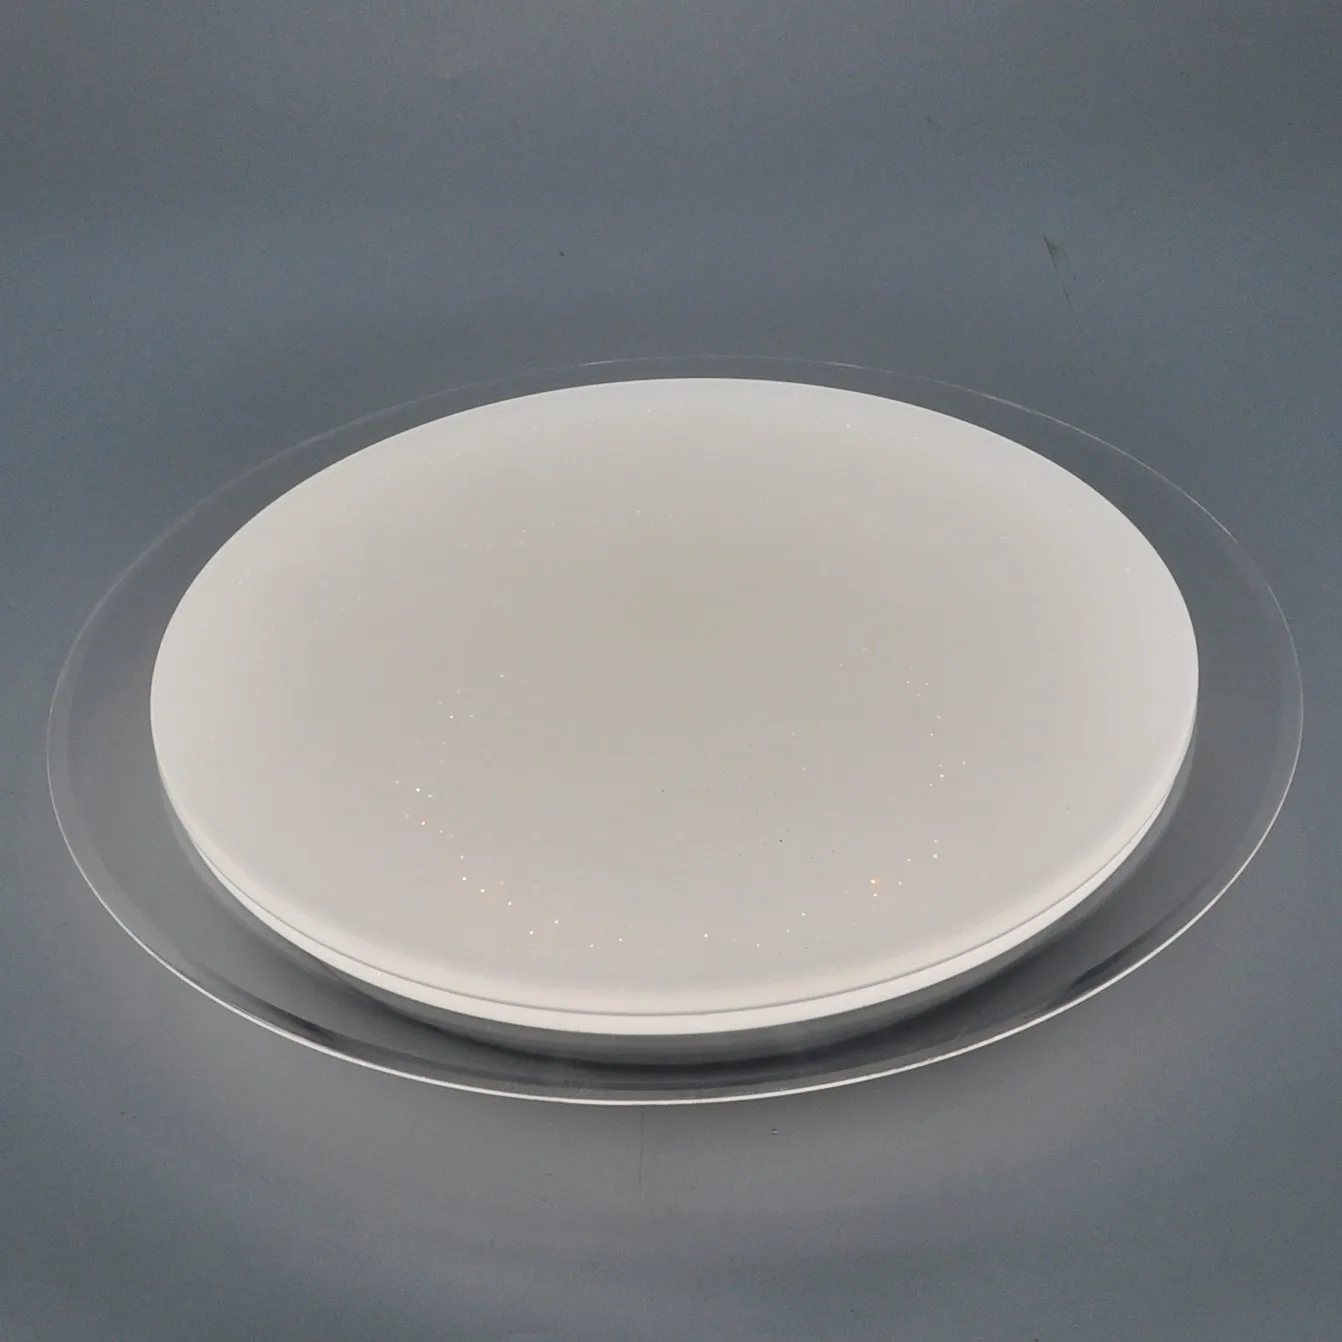 High quality deckenleuchte round plastic kitchen led ceiling light covers